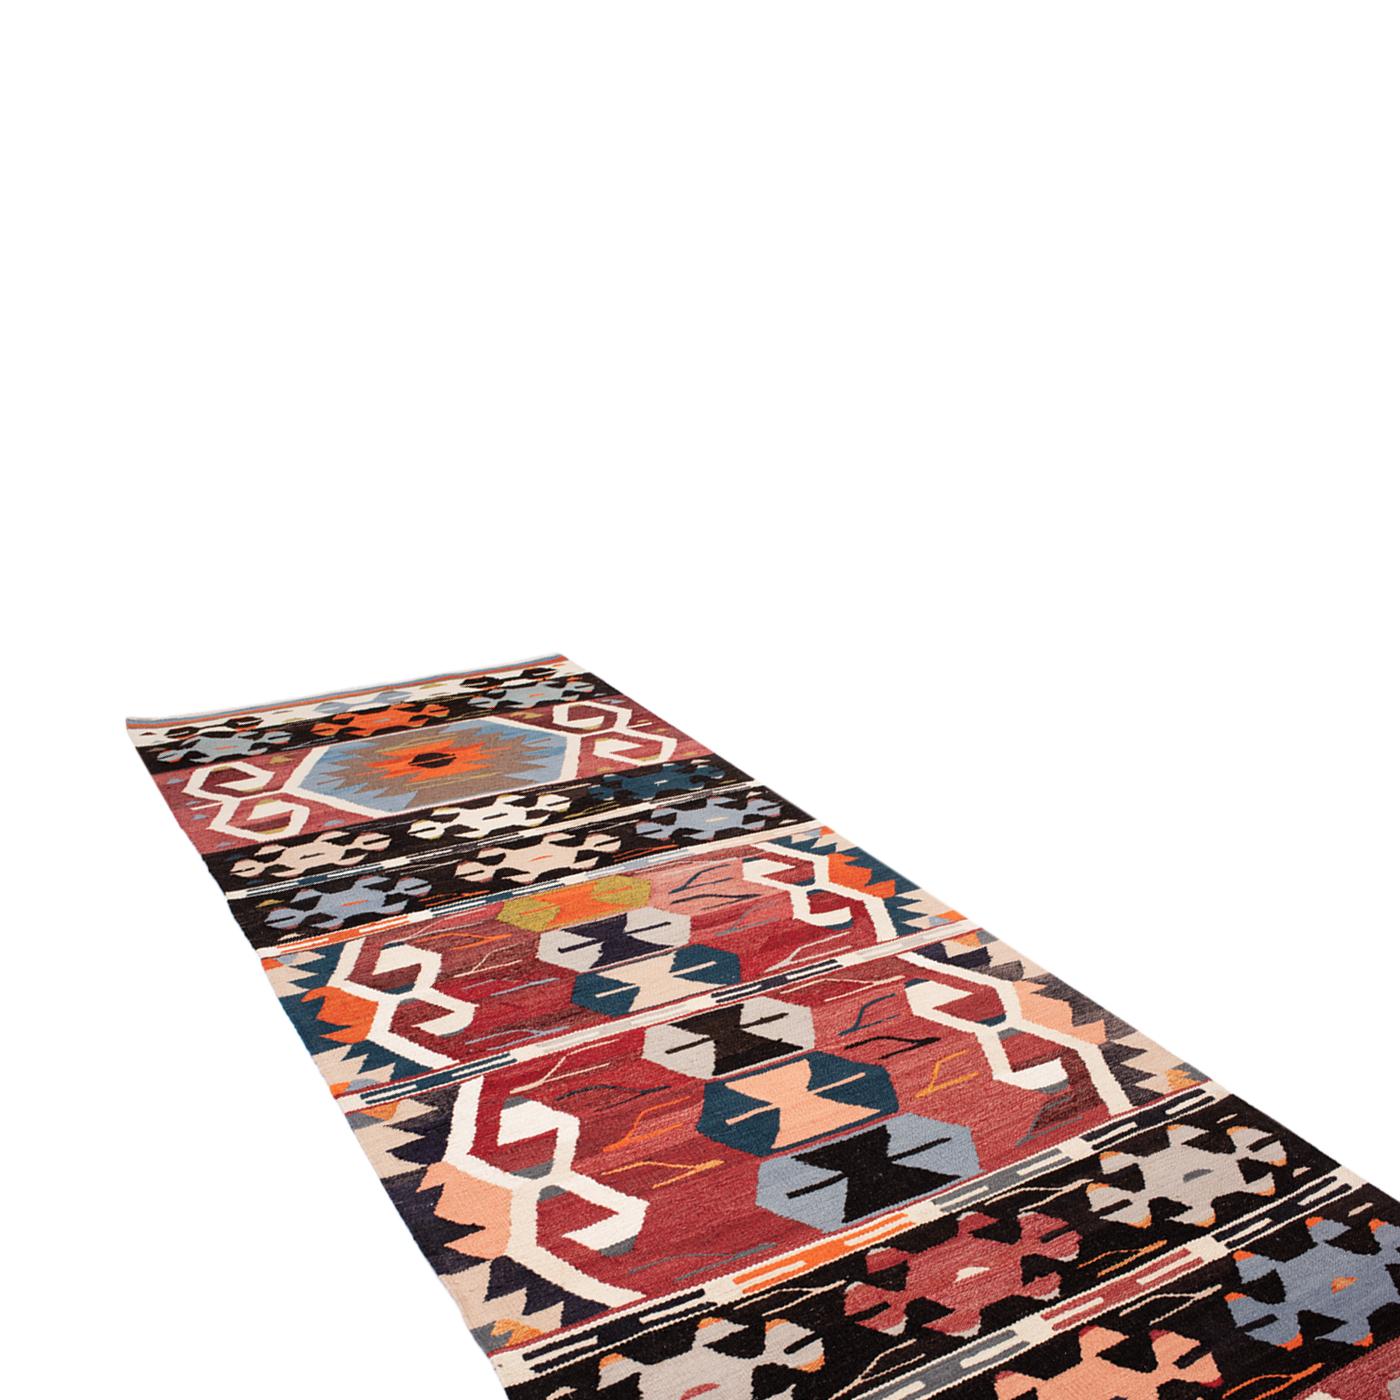 COLOUR: Original
MATERIAL: 100% Recycled wool
QUALITY: Flatweave
ORIGIN: Handwoven rug produced in Istanbul, Turkey
  
STOCK SIZE DISPLAYED: 110cm x 352cm

This Kilim has been hand-woven by female weavers in Turkey, using traditional methods. The